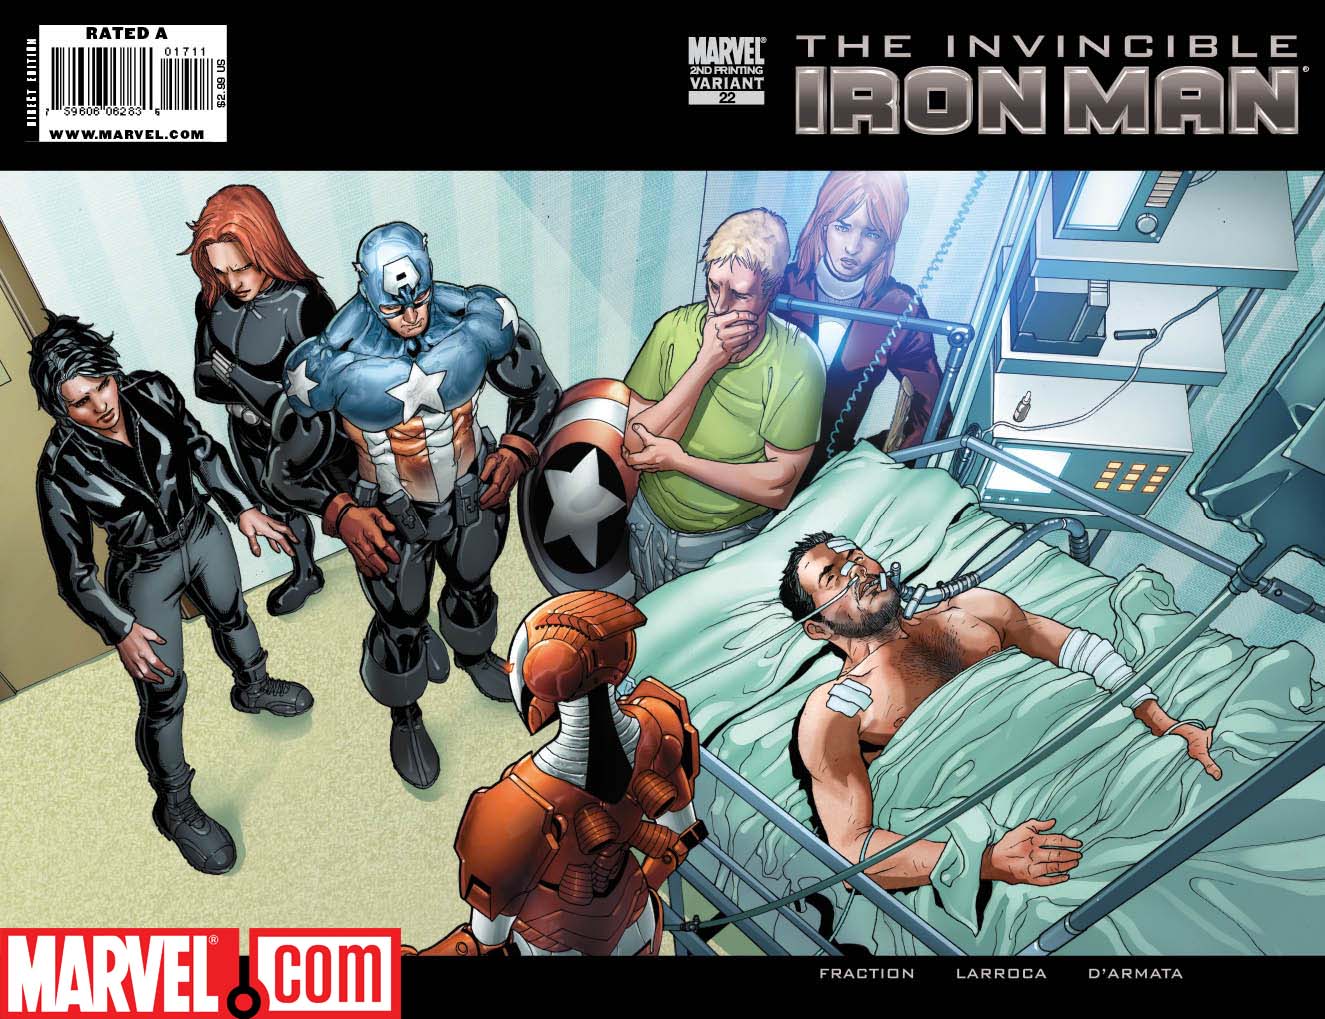 INVINCIBLE IRON MAN #22 SECOND PRINTING VARIANT